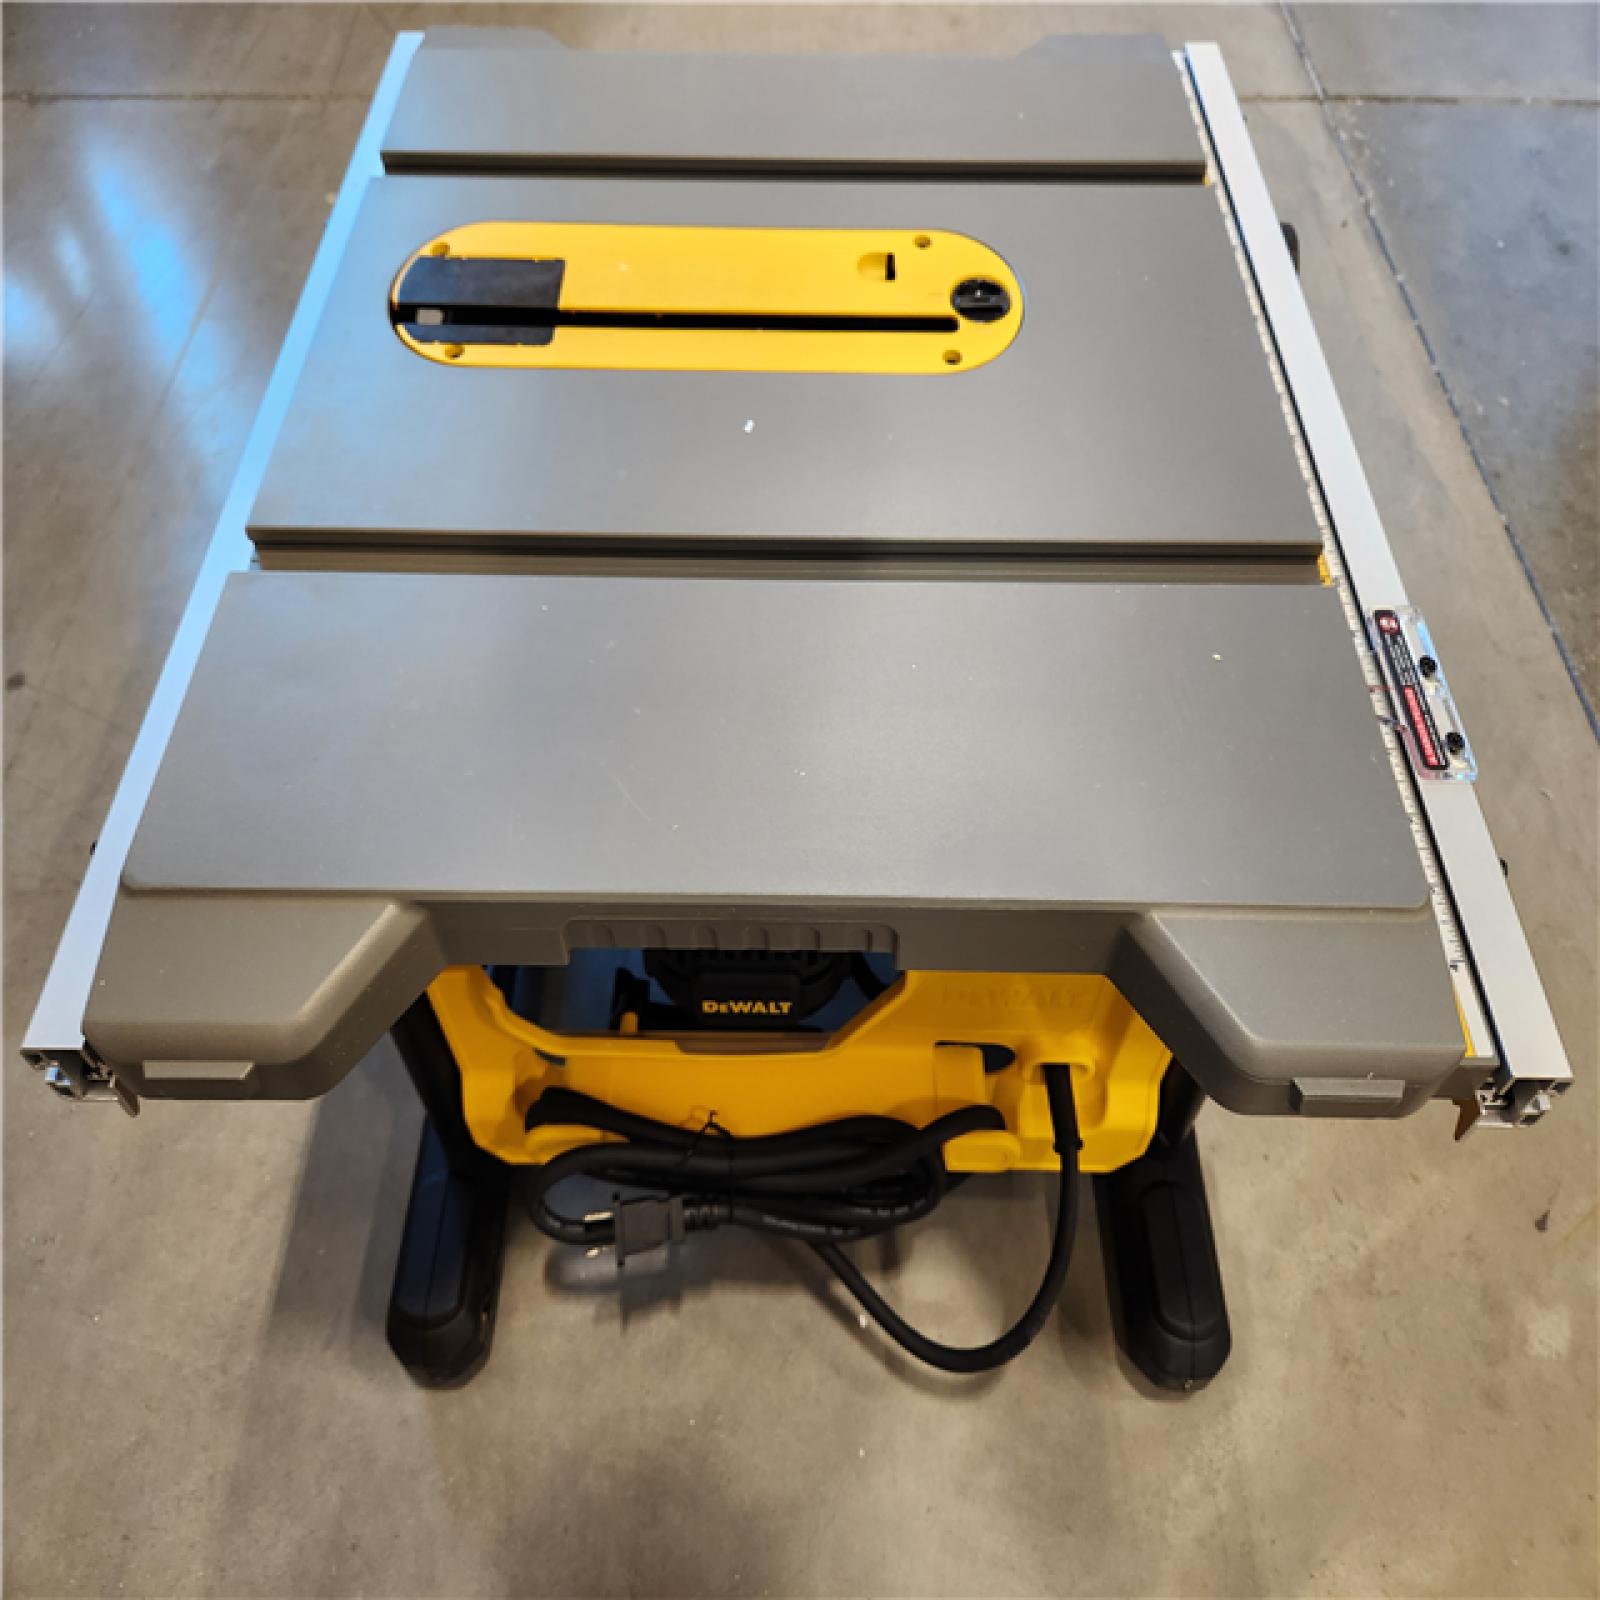 AS-IS DEWALT 15 Amp Corded 8-1/4 in. Compact Portable Jobsite Tablesaw